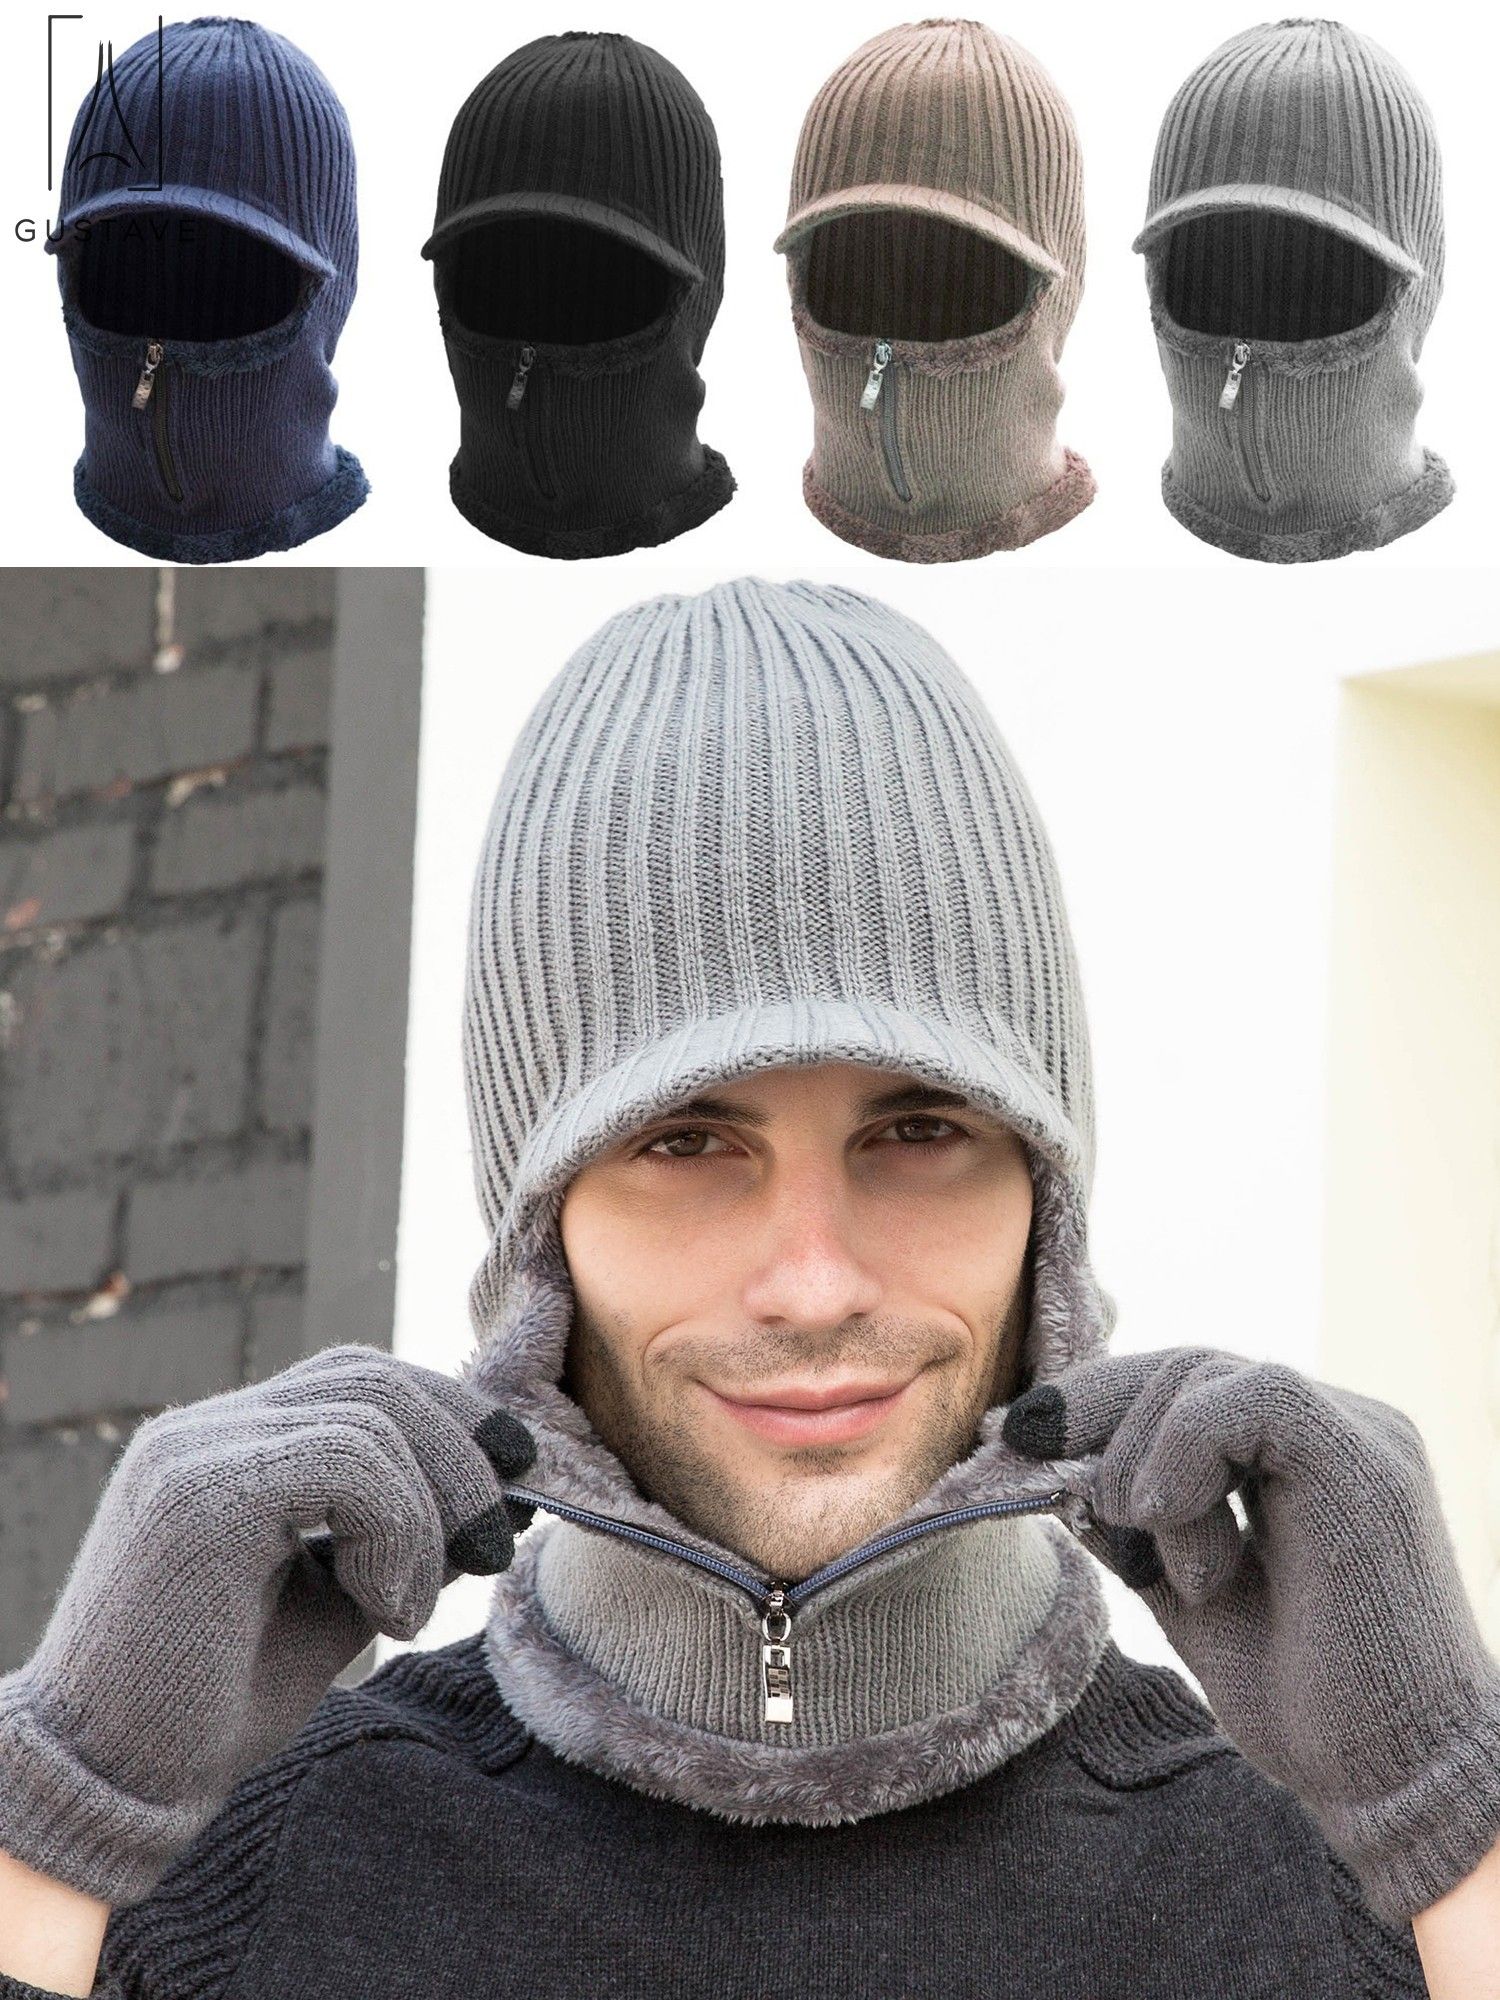 Gustave 2 In 1 Men Winter Warm Balaclava Beanie Hat with Fleece Lining Zipper Neck Scarf Warmer Ear Protector Knitting Stripes Hat and Scarf Conjoined Set "Gray" - image 1 of 9